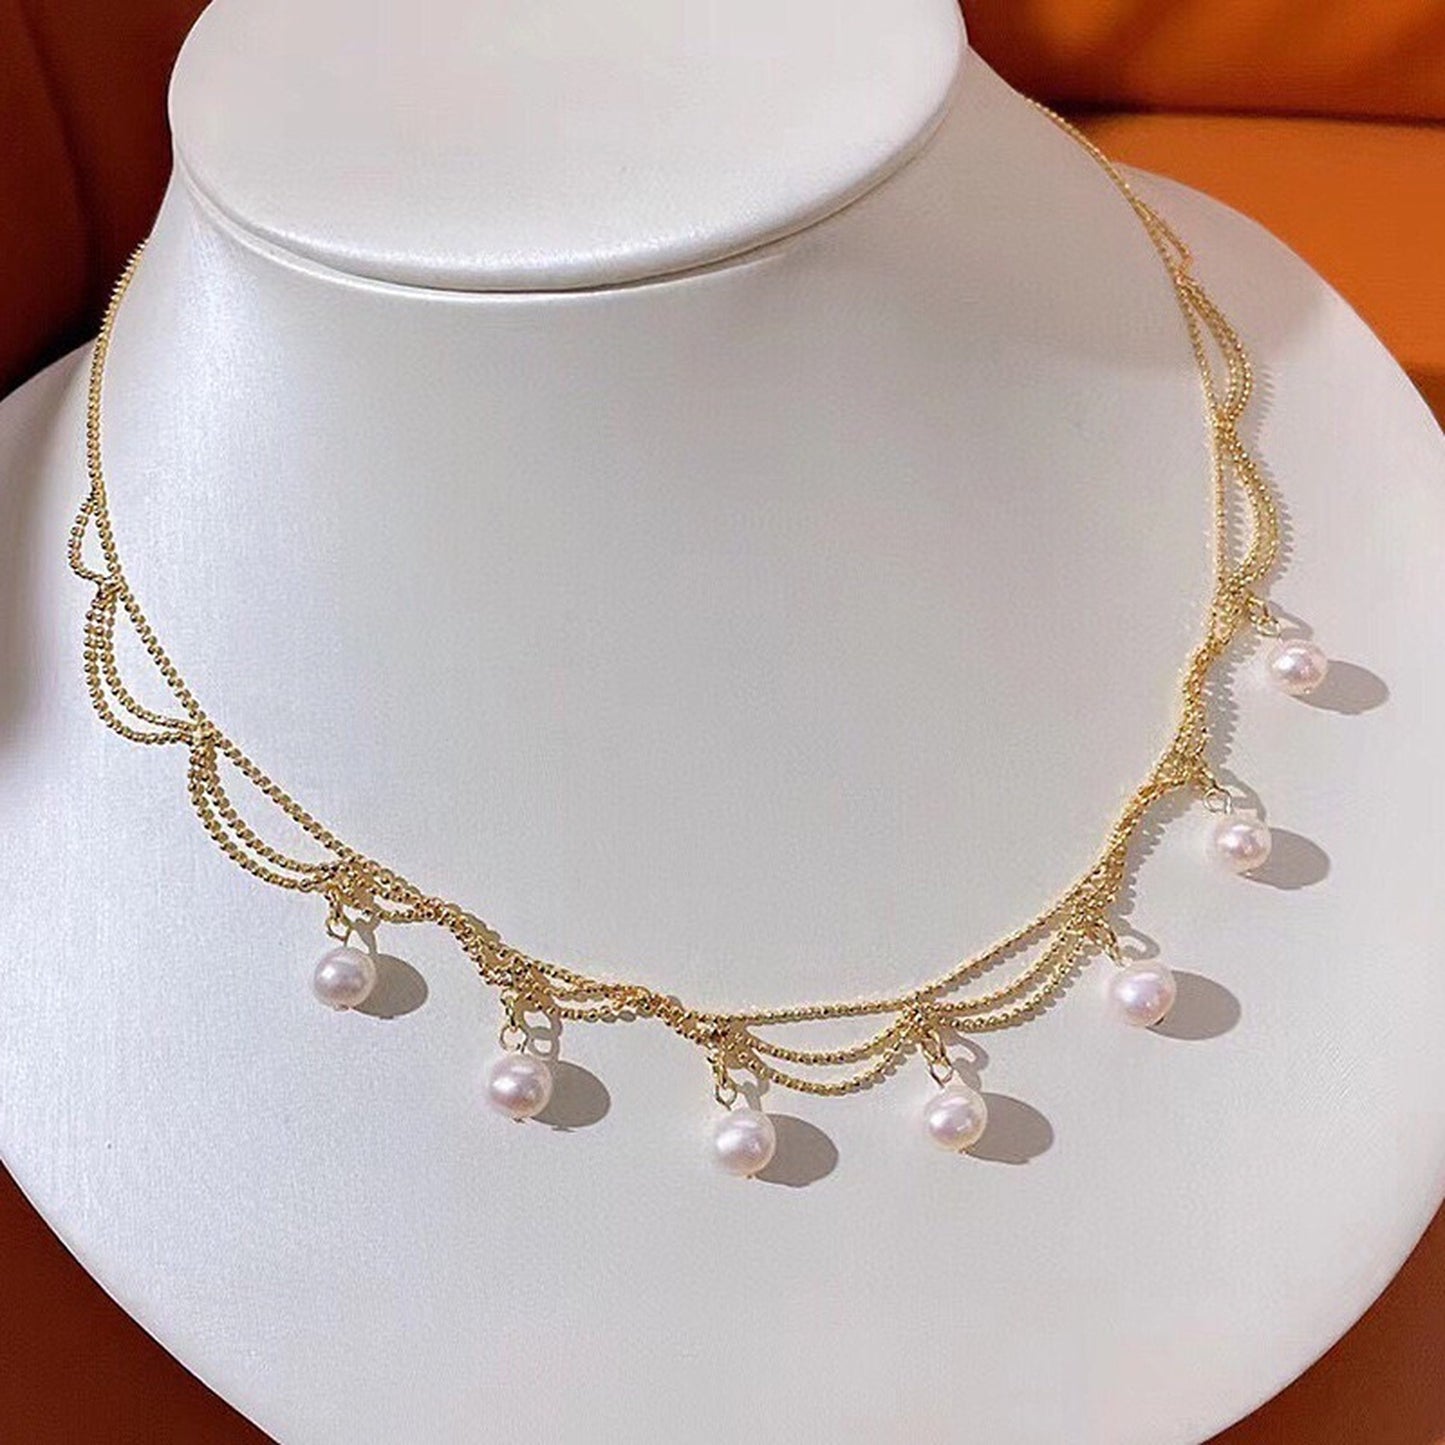 Natural Pearl Layered Necklace, Vintage Style Bridal Wedding Jewelry, Floating Pearl Drop Necklace, Gothic Layering Choker, 14K Gold-filled